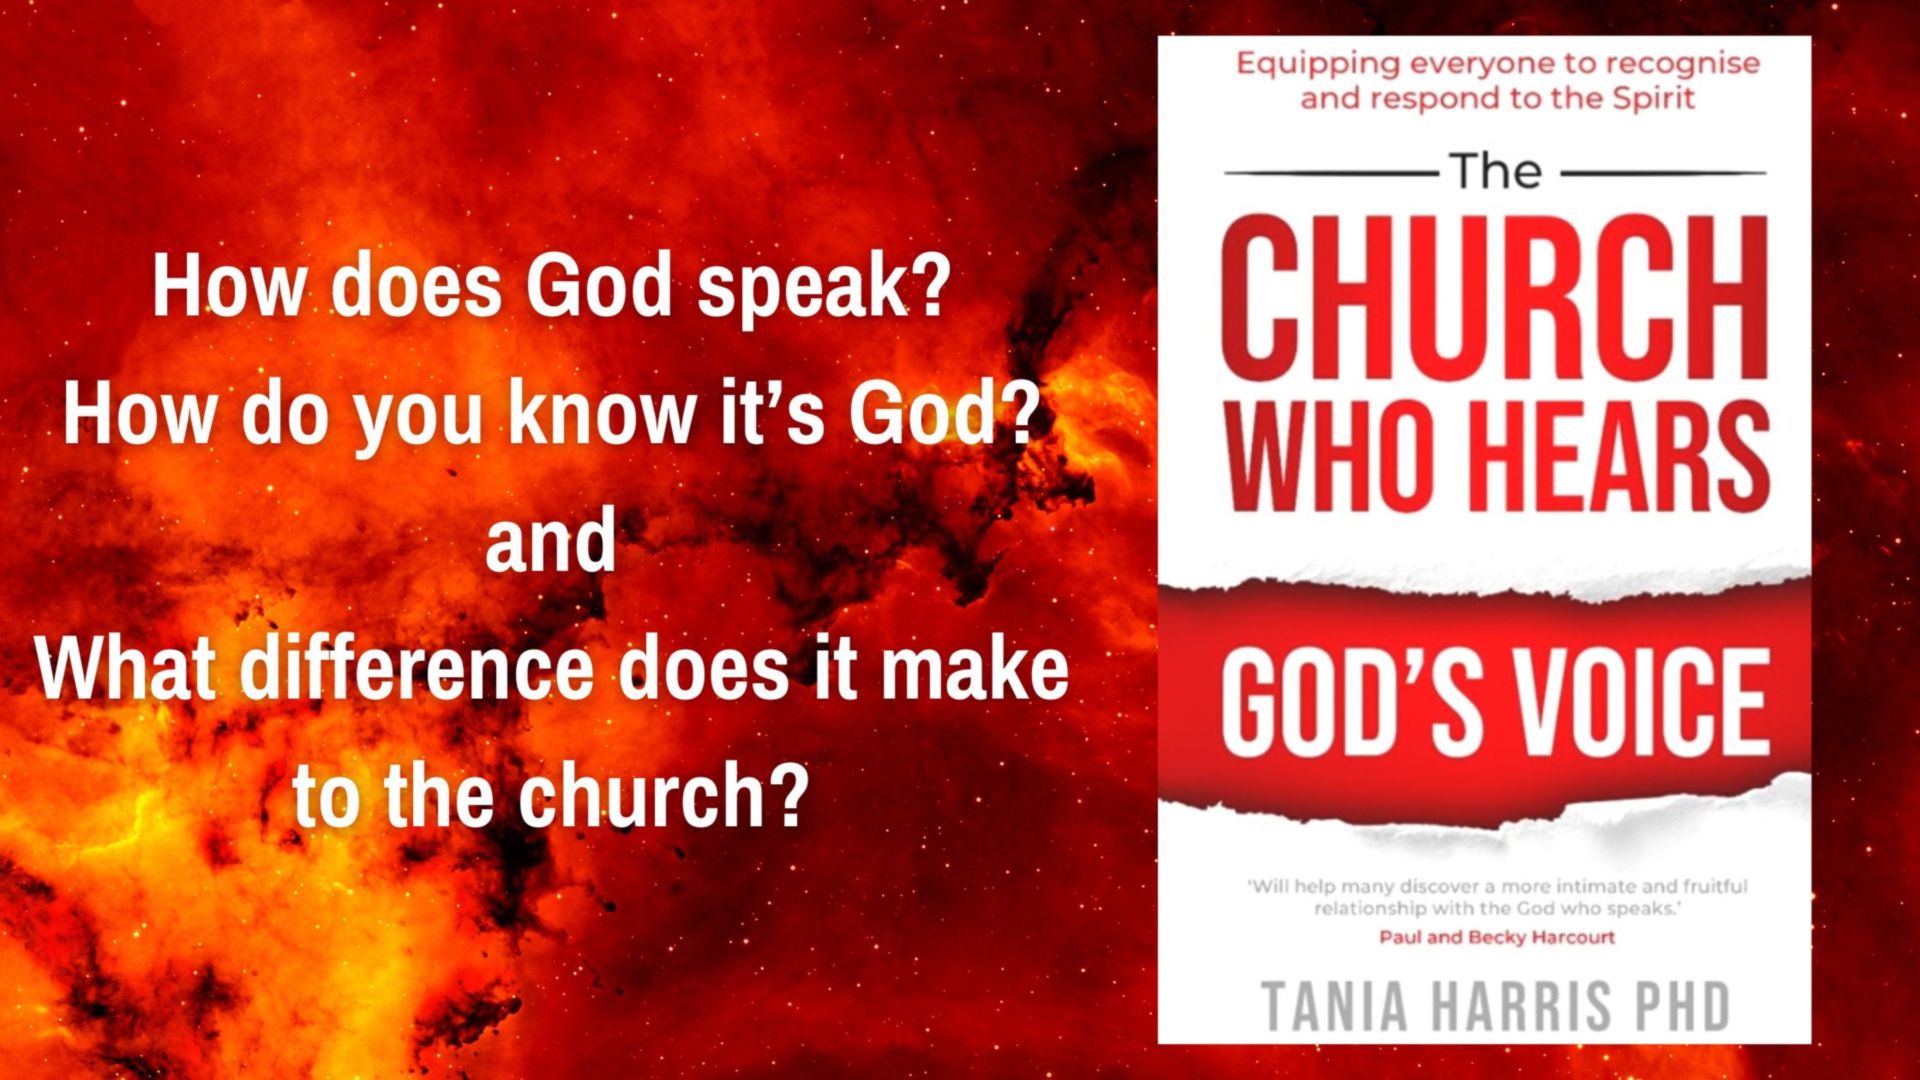 Interview with Revd Dr Tania Harris, author of 'The Church Who Hears God's Voice'